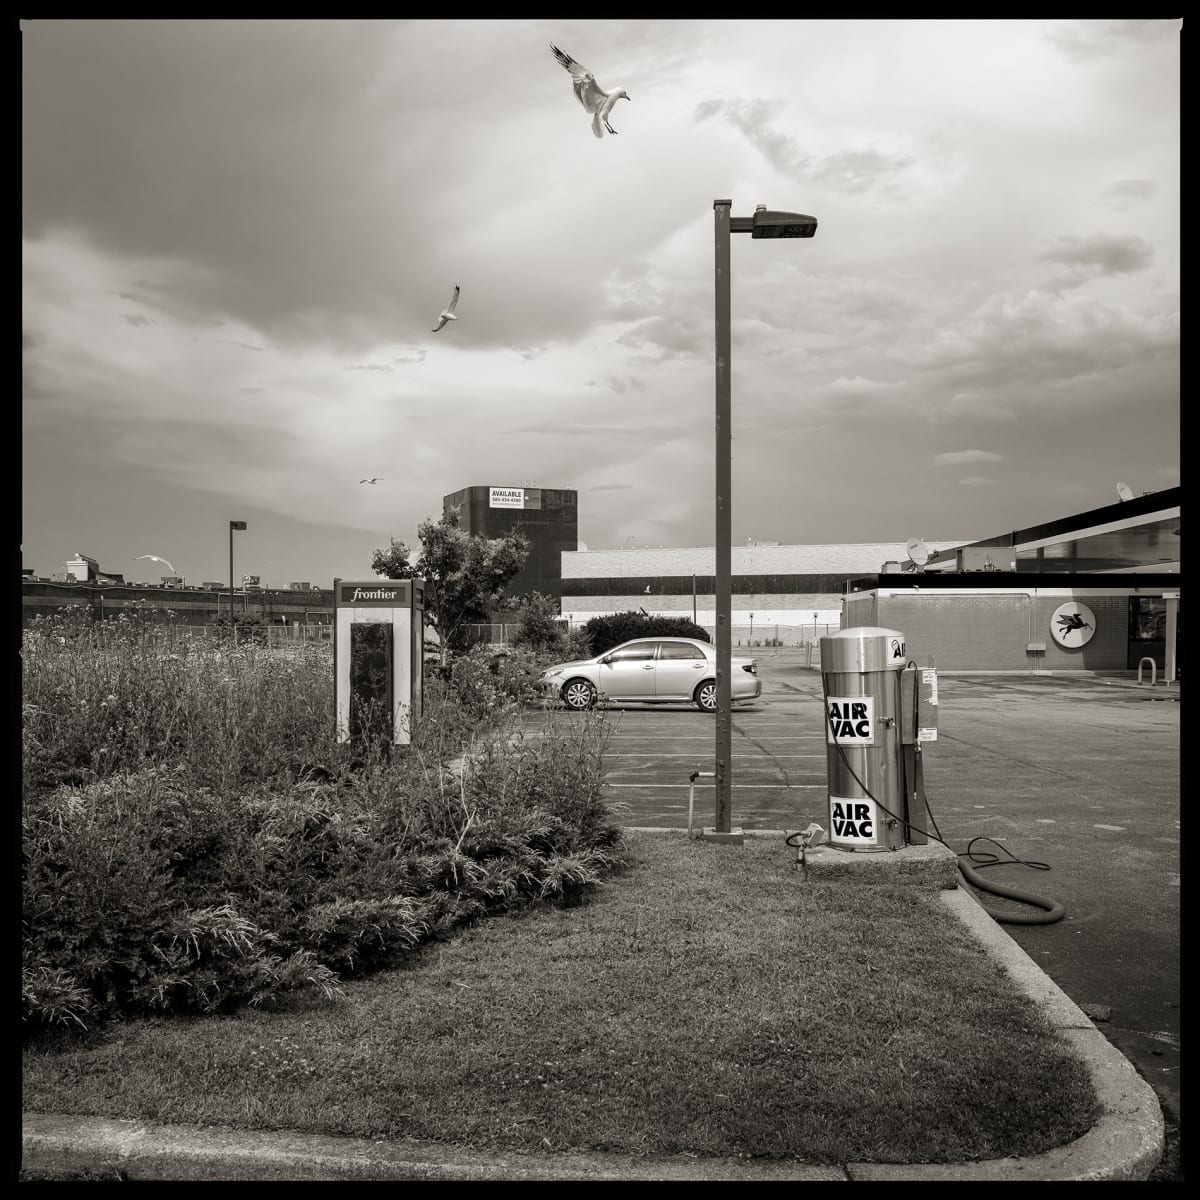 585.427.9629 – 1775 Marketplace Drive, Henrietta, NY 14623 by Eric T. Kunsman  Image: ID: A black and white image shows a parking lot with buildings in the background.  There is a light post in the center.  To the right there is an Air Vac station for tires and to the right is a payphone booth.  There are sea gulls flying in the sky.